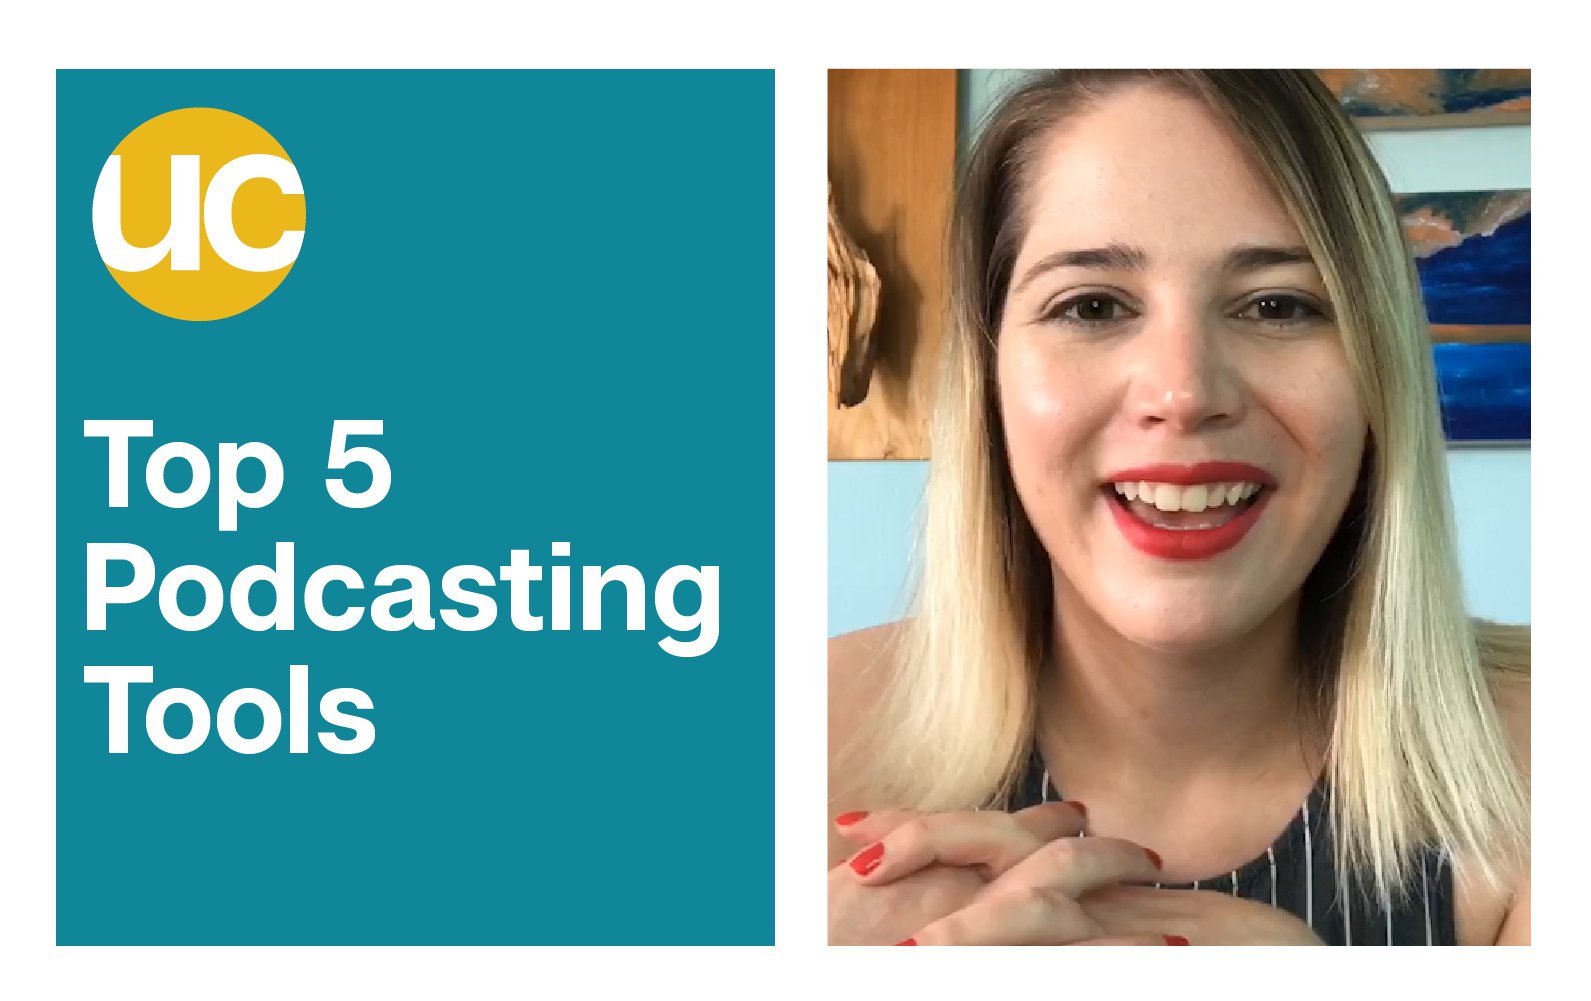 My Top 5 Podcasting Tools